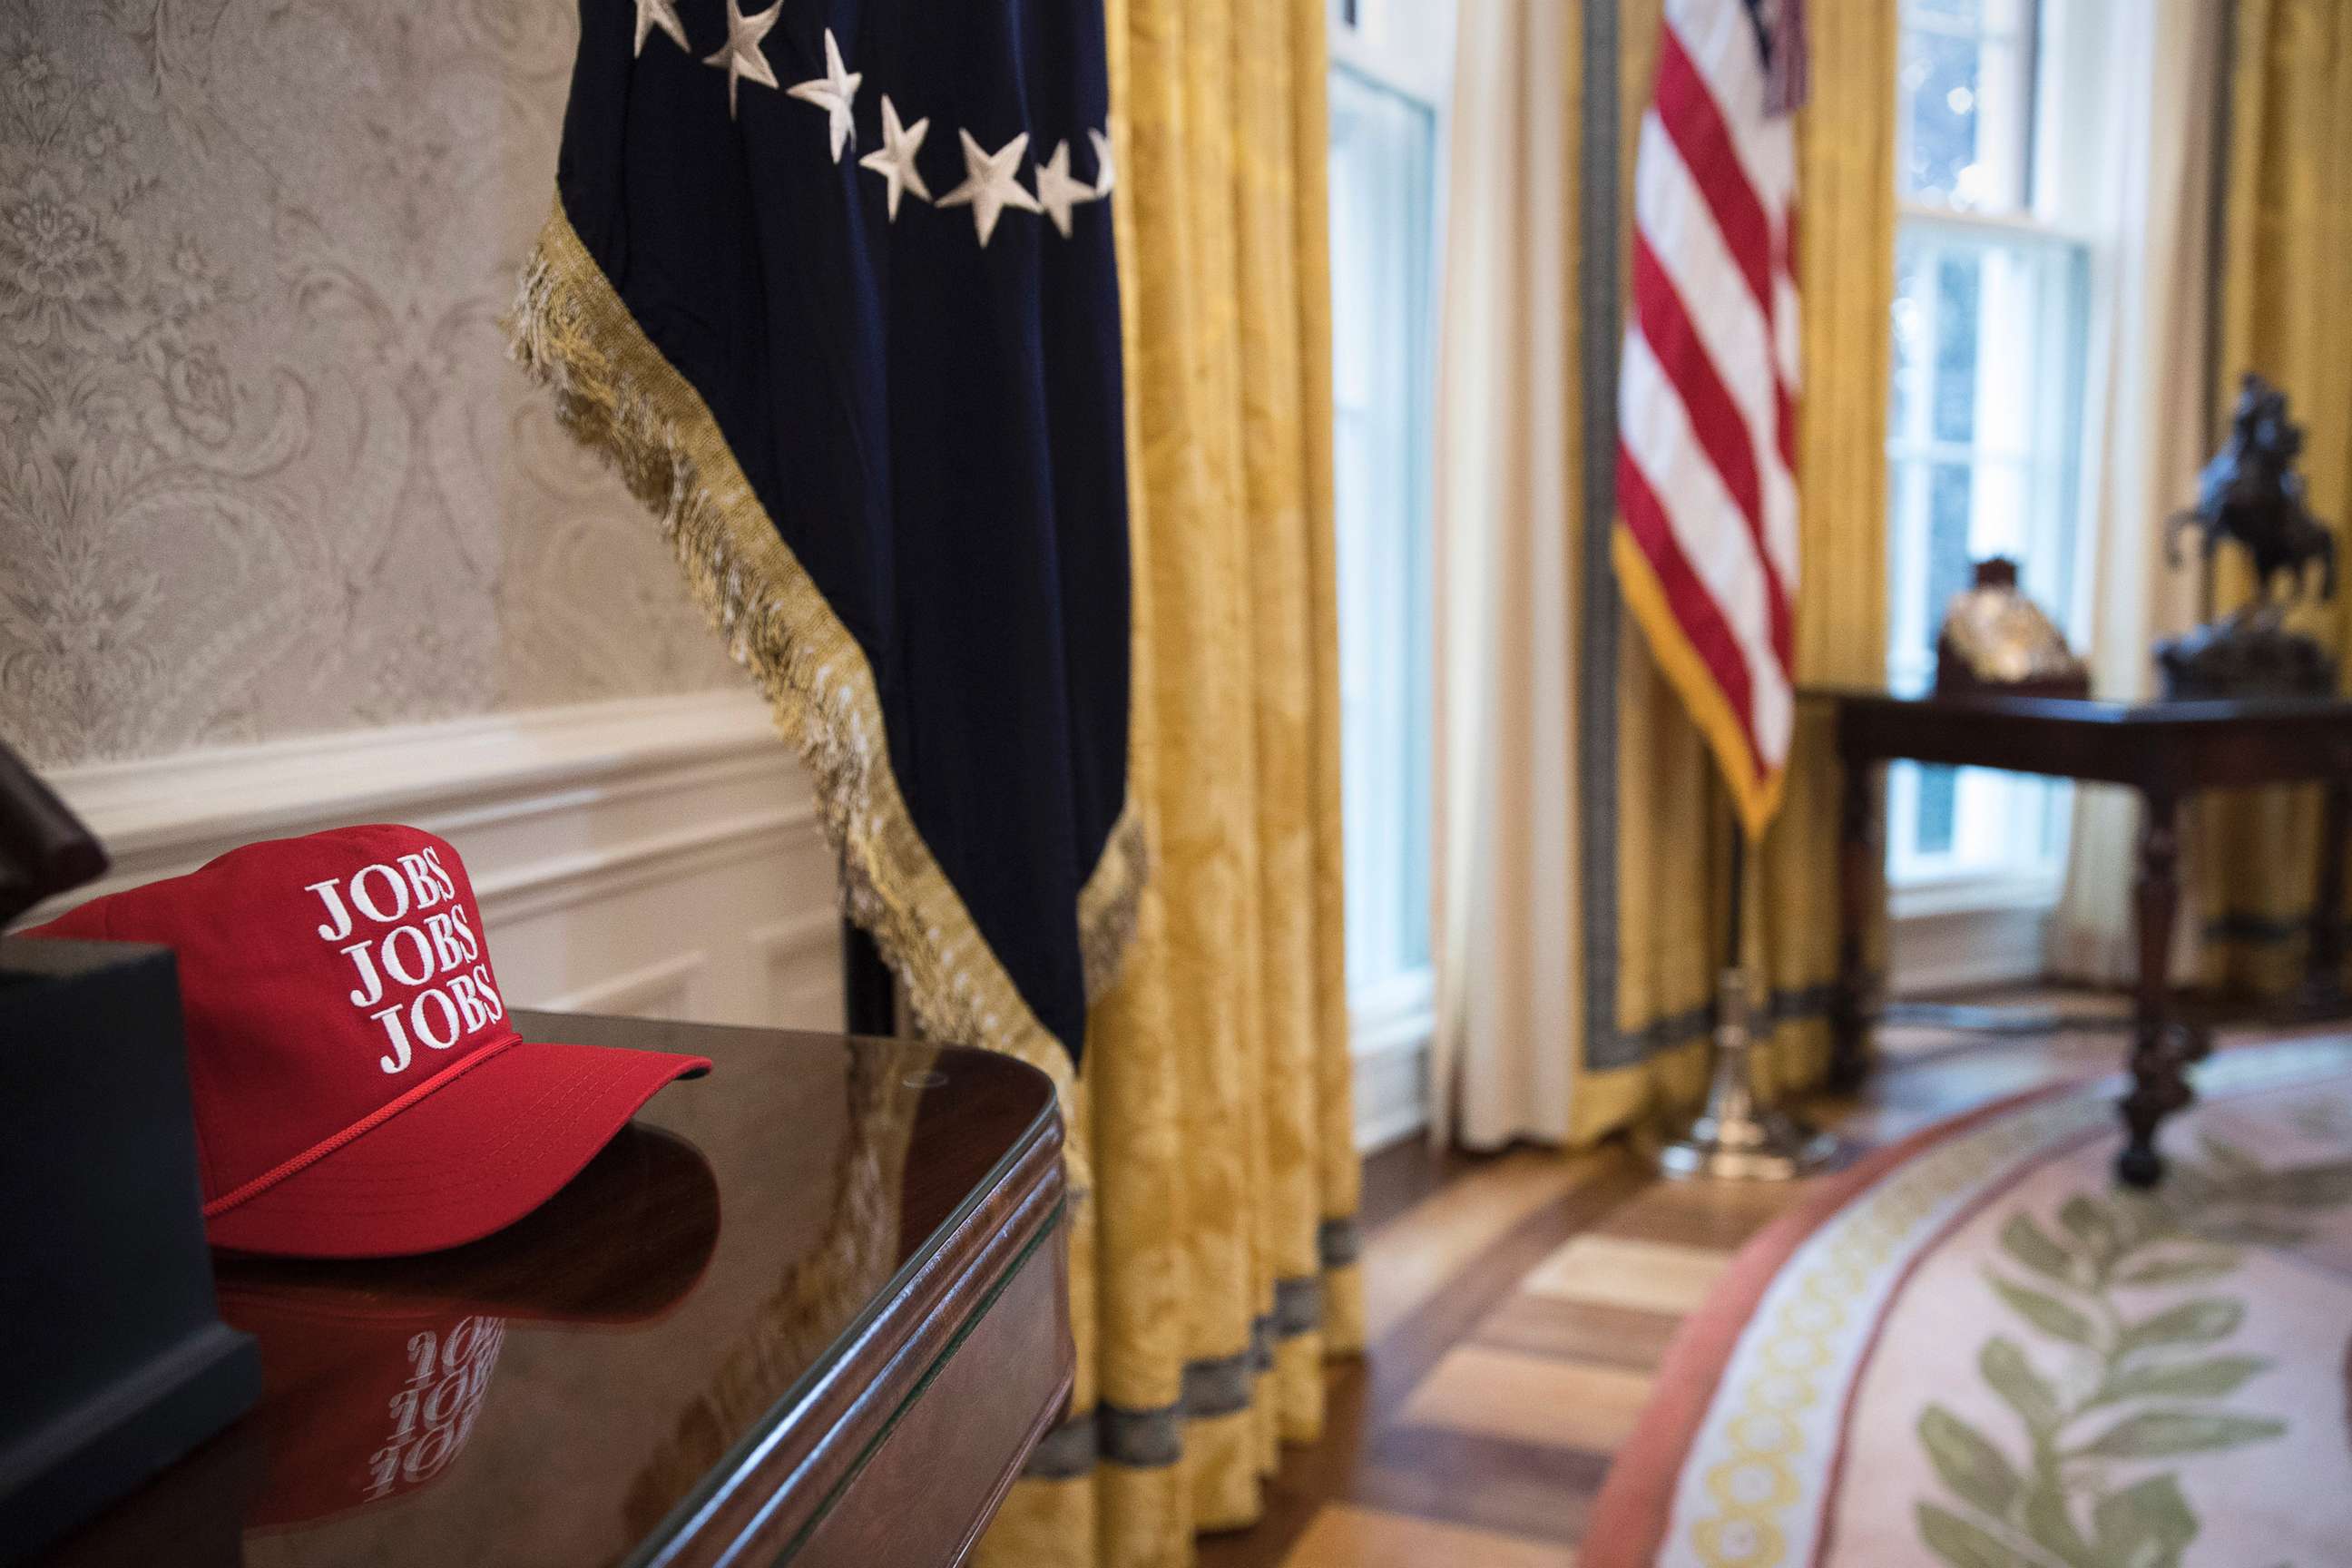 PHOTO: A red hat with "Jobs, Jobs, Jobs" printed on it rests on a table in the Oval Office, Jan. 31, 2018.